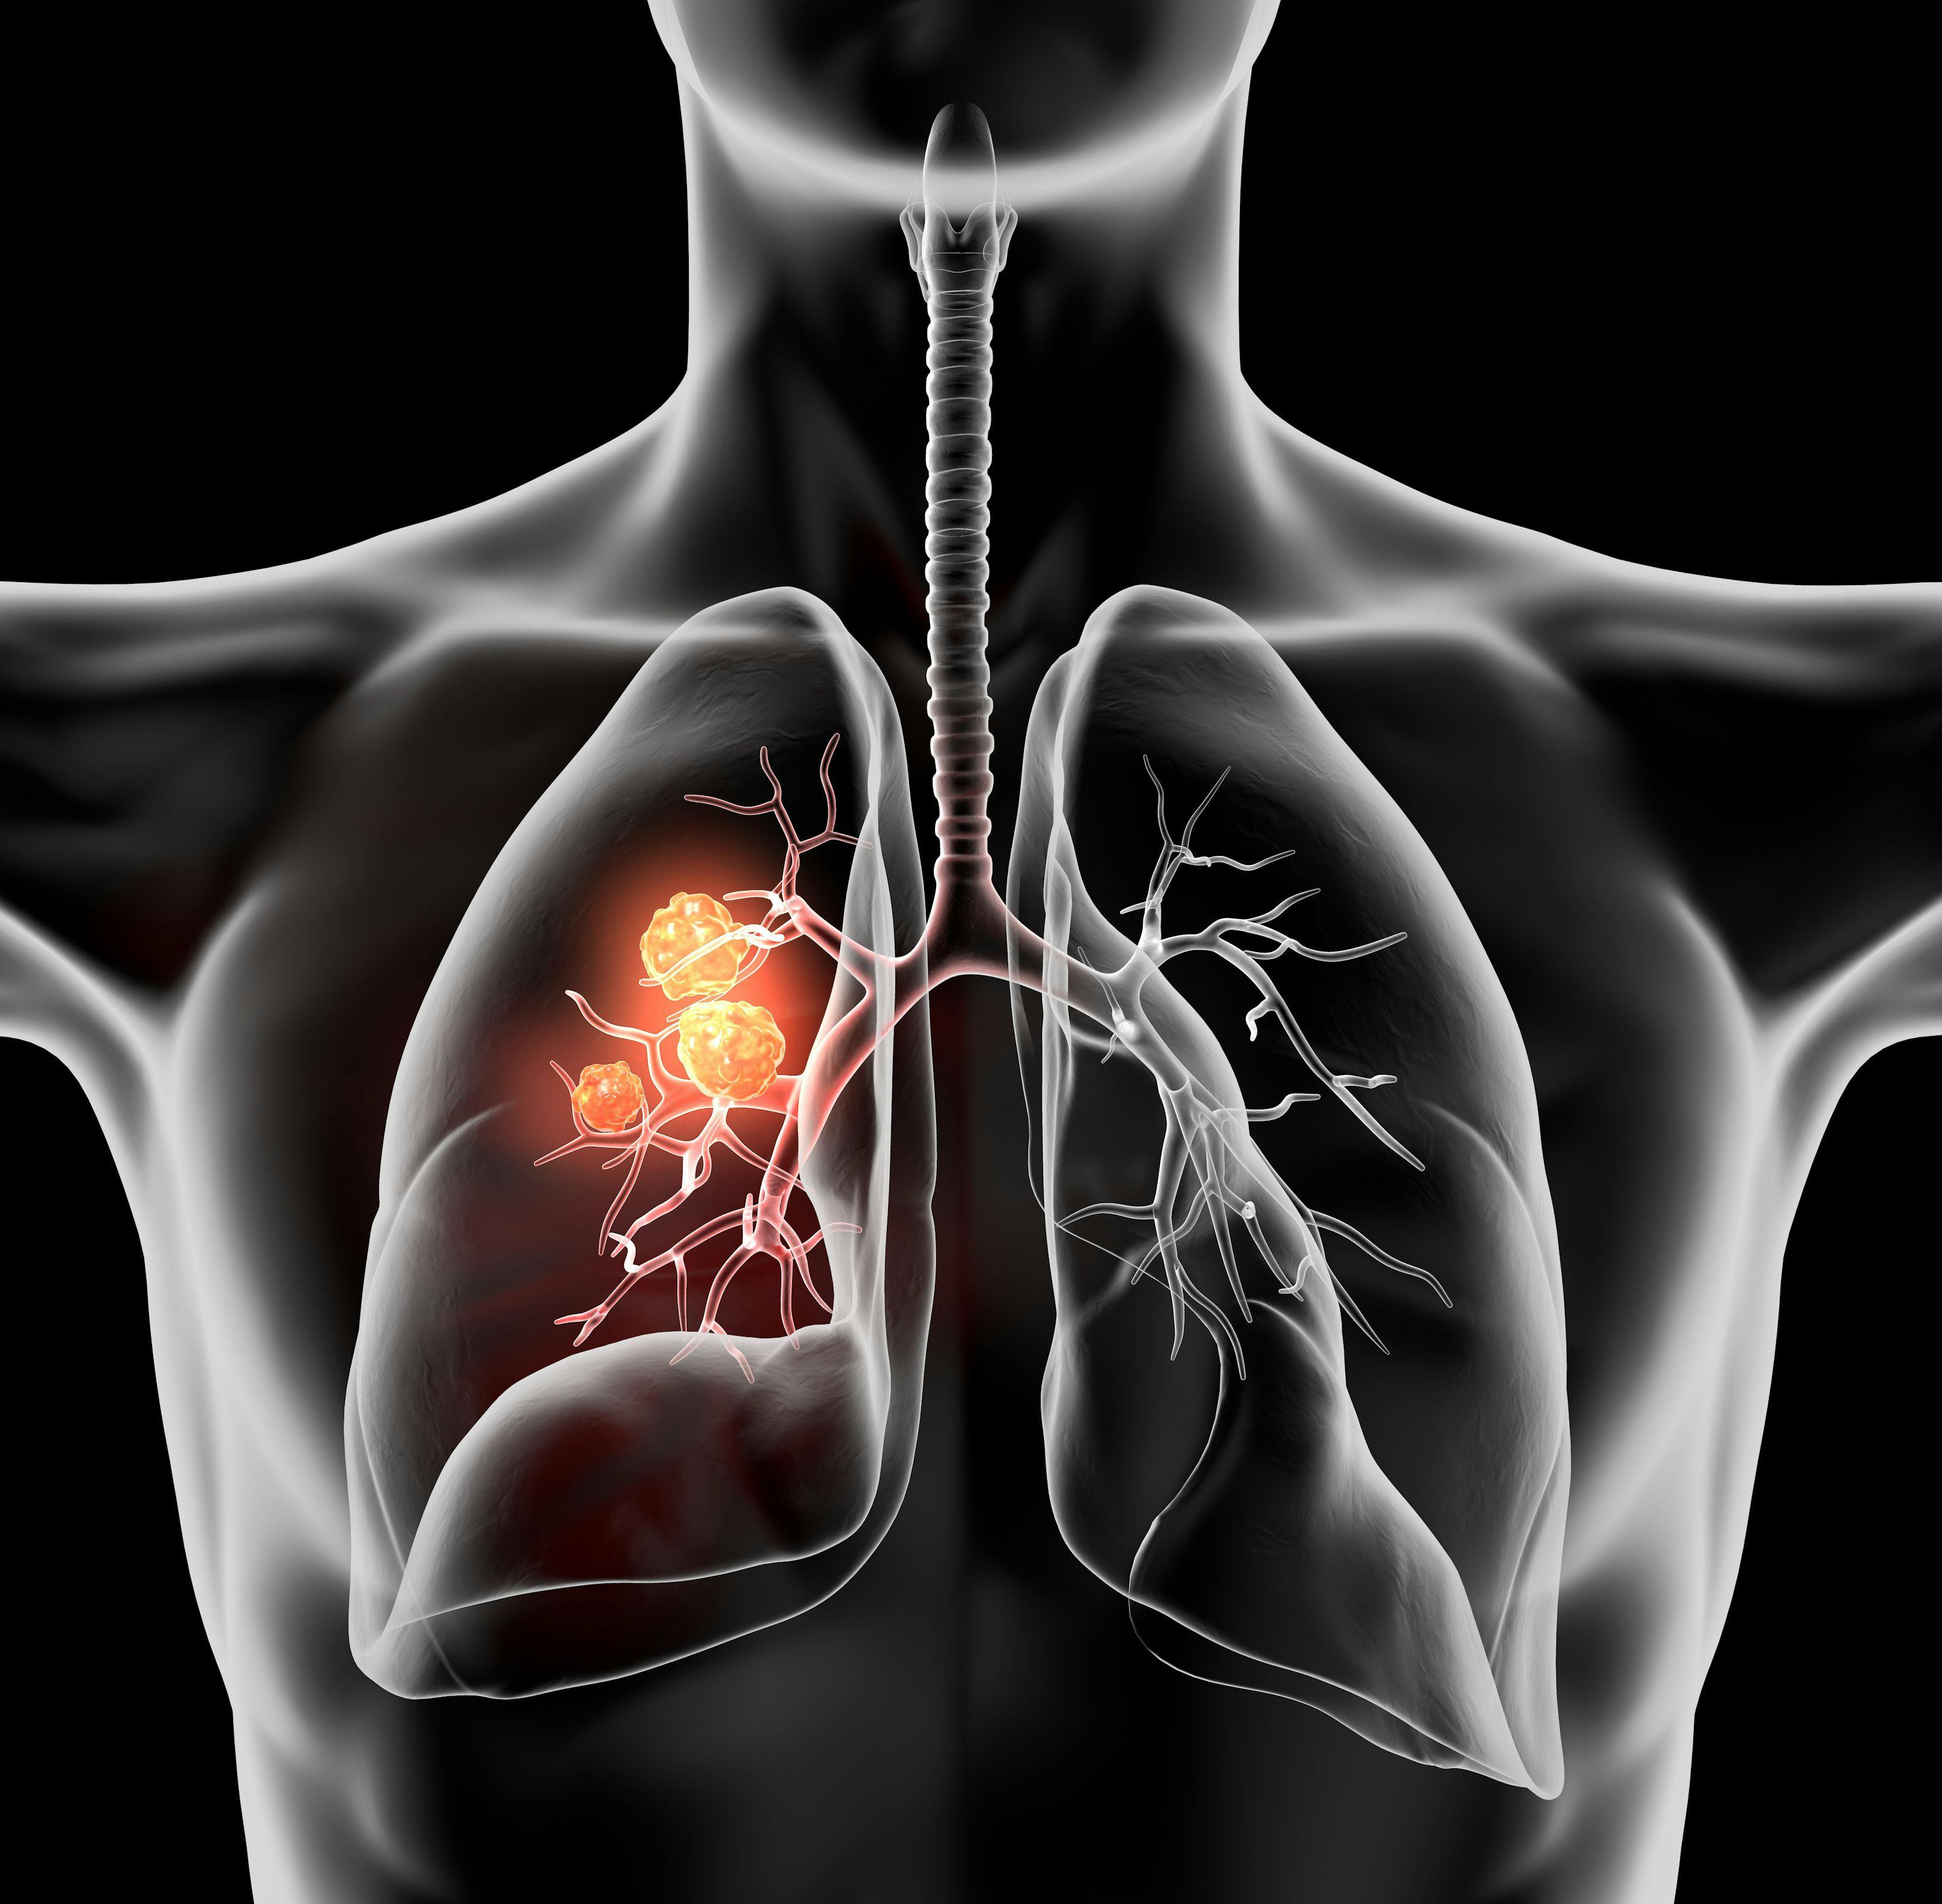  Stereotactic Body Radiotherapy Is a Viable Option for Pulmonary-Impaired NSCLC